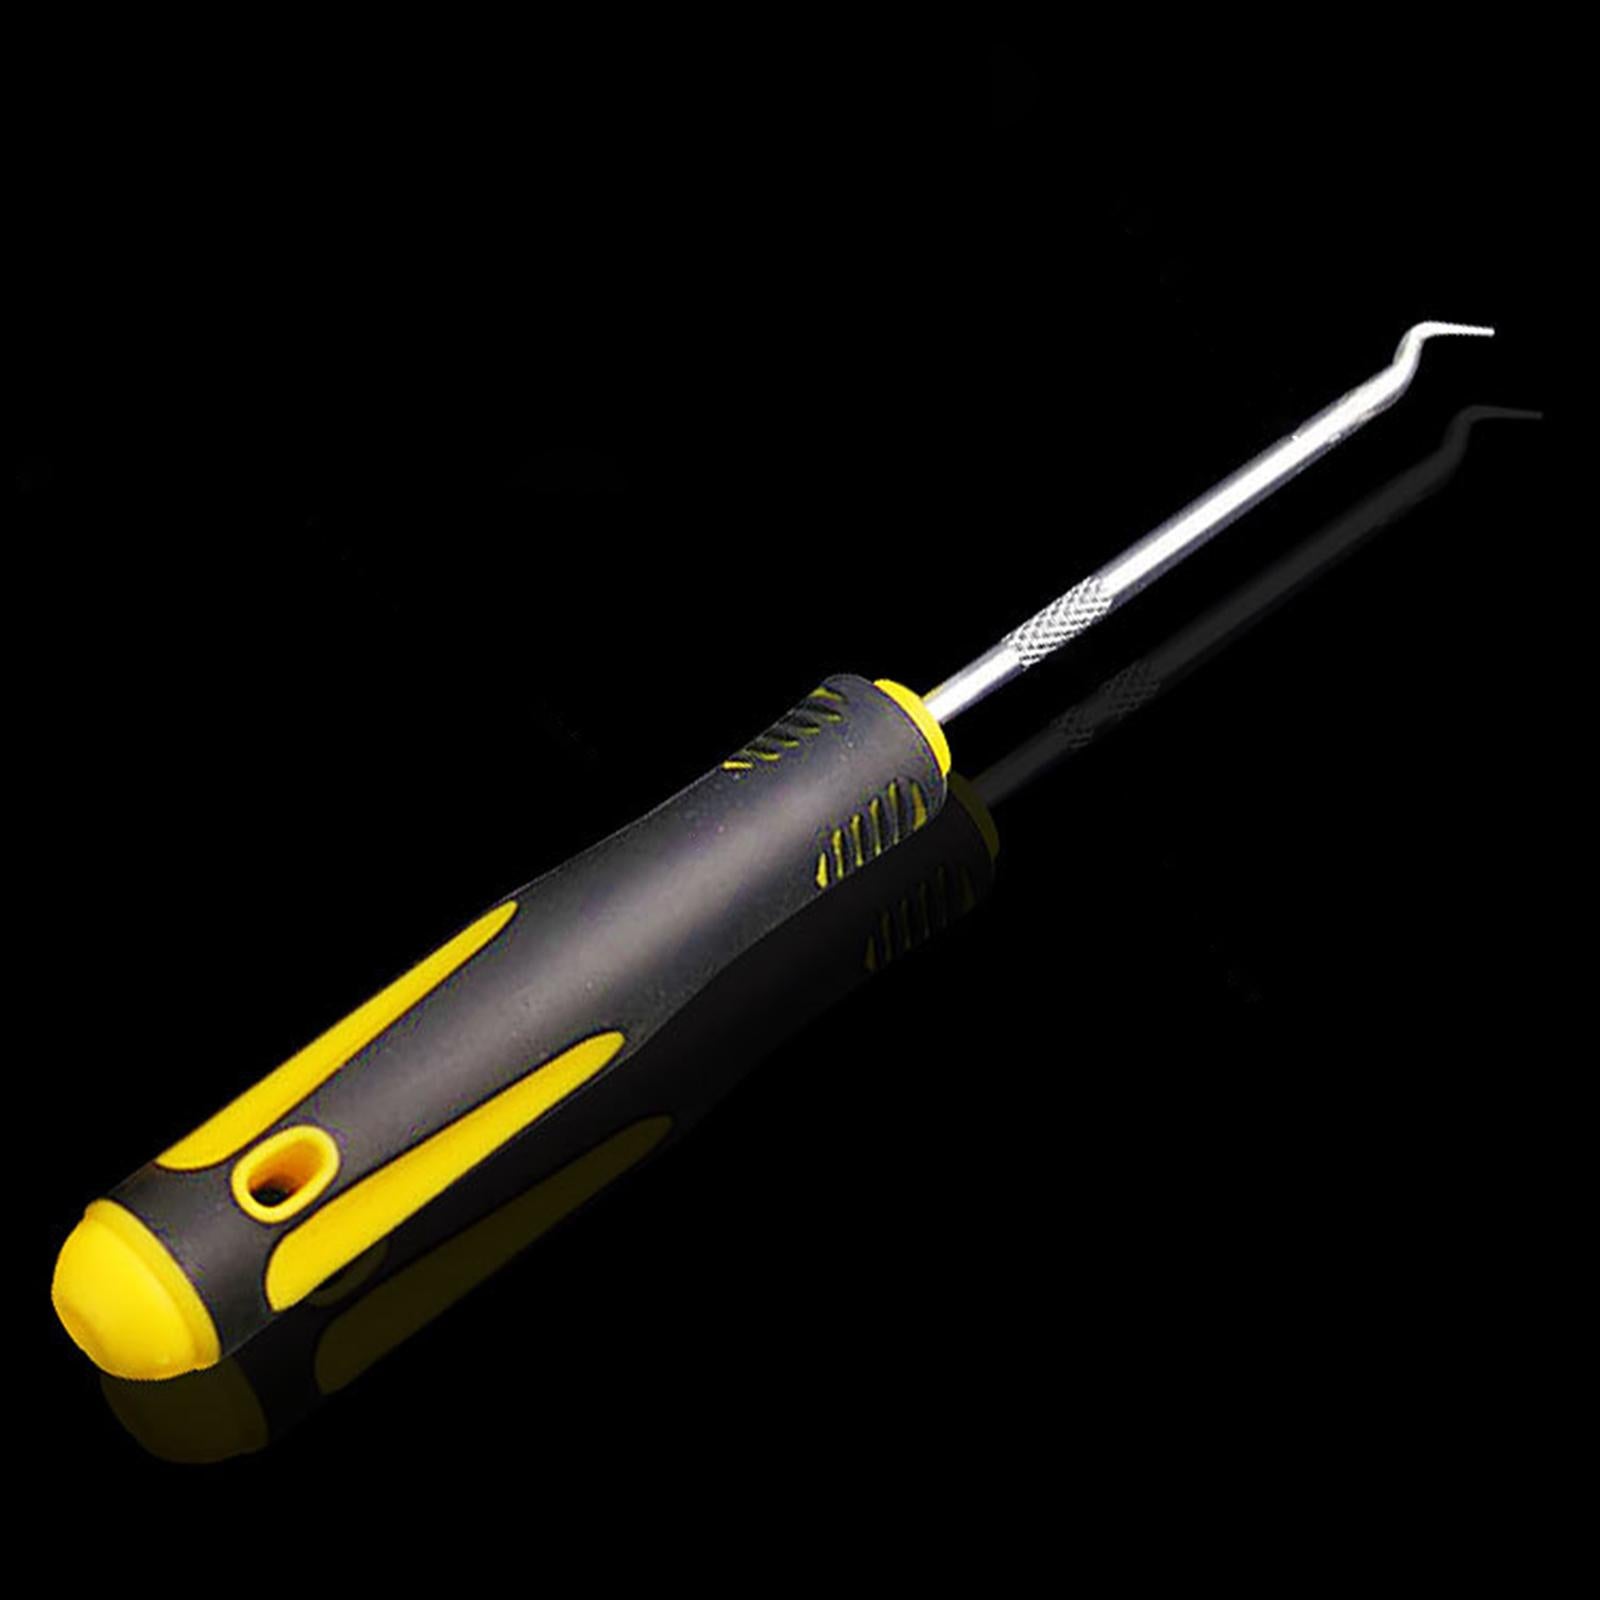 Oil Seal Remover Screwdriver Gasket Puller for Industrial Automobile Home Black Yellow